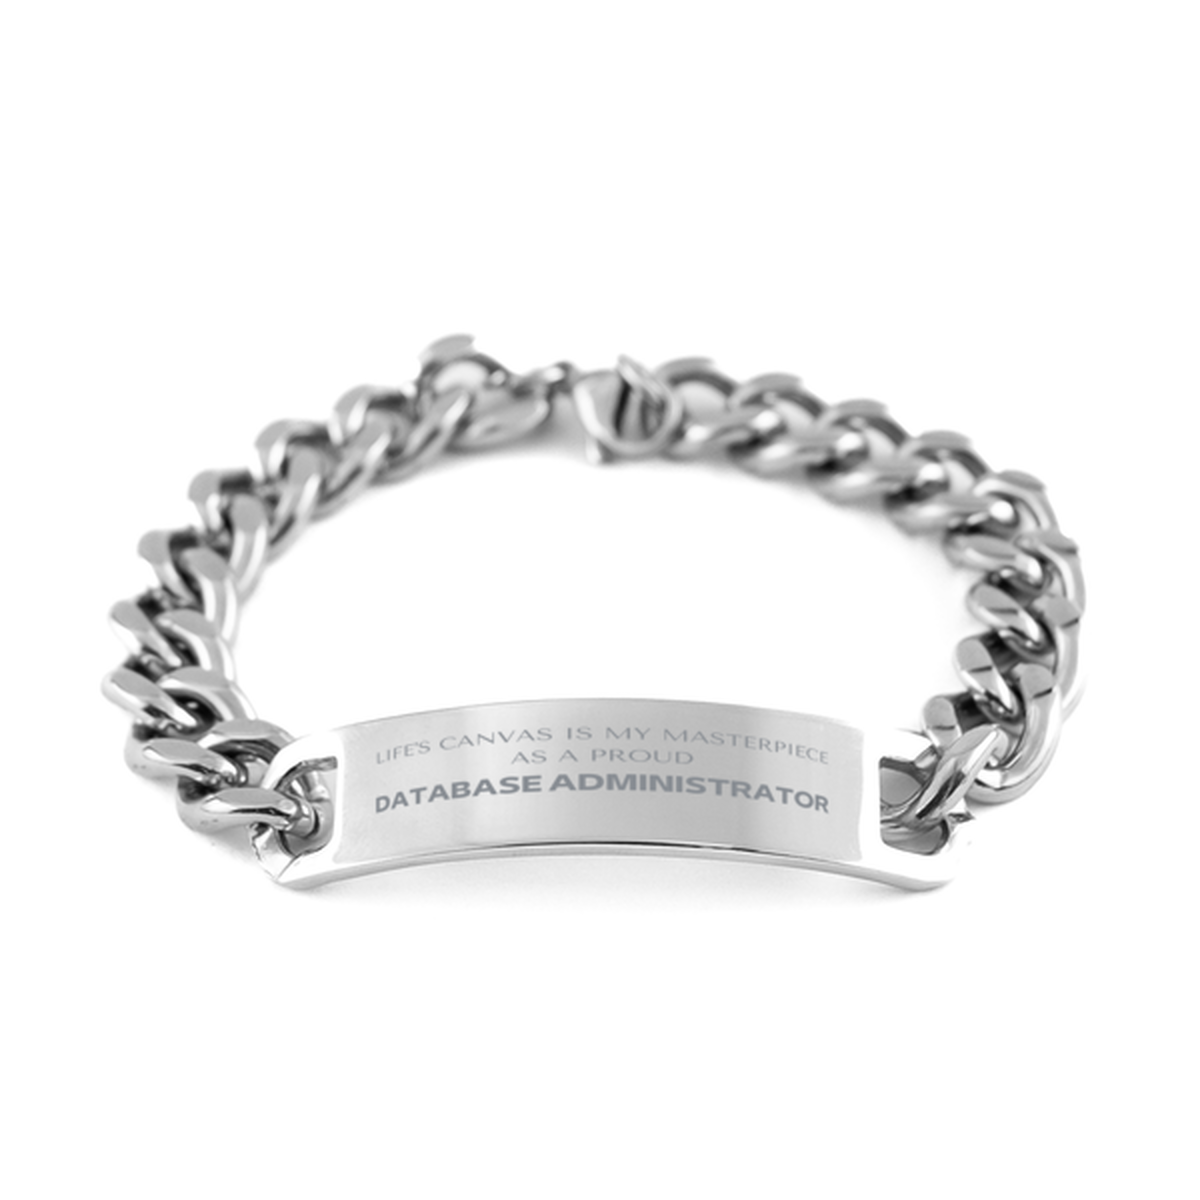 Proud Database Administrator Gifts, Life's canvas is my masterpiece, Epic Birthday Christmas Unique Cuban Chain Stainless Steel Bracelet For Database Administrator, Coworkers, Men, Women, Friends